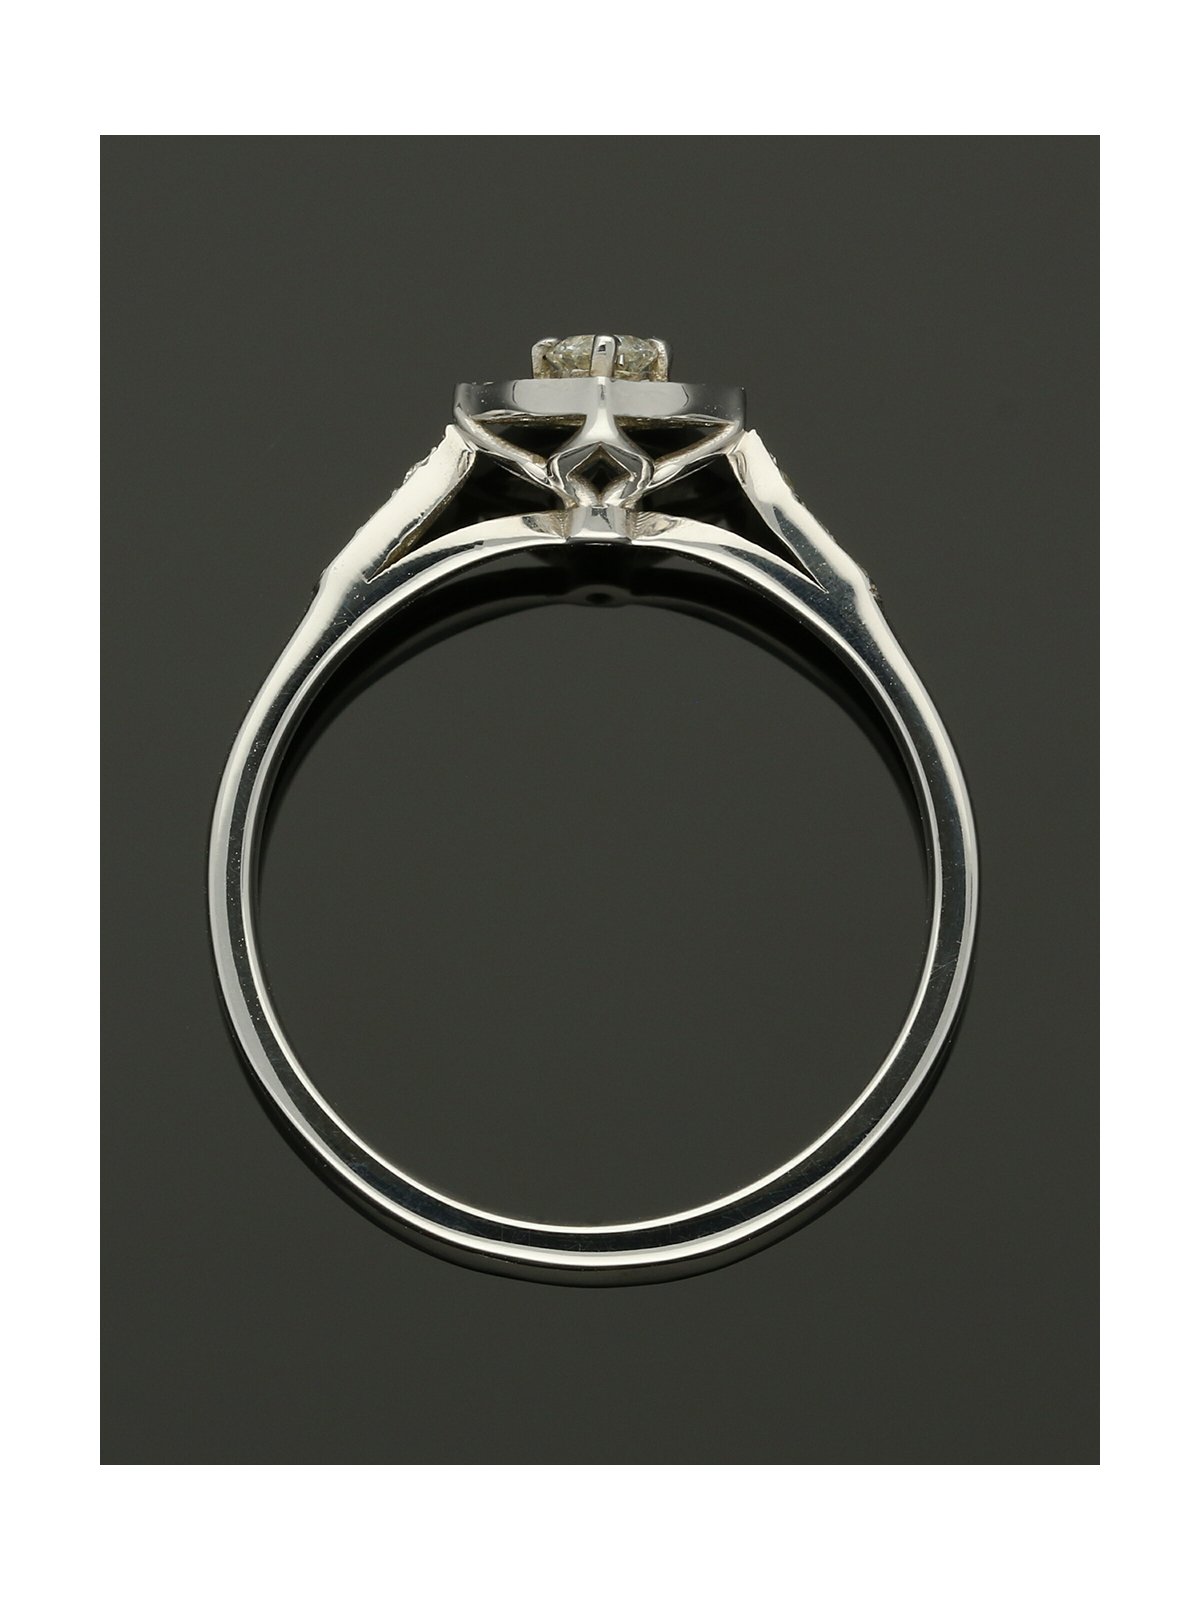 Diamond Cluster Ring 0.24ct Round Brilliant Cut in 9ct White Gold with Diamond Shoulders